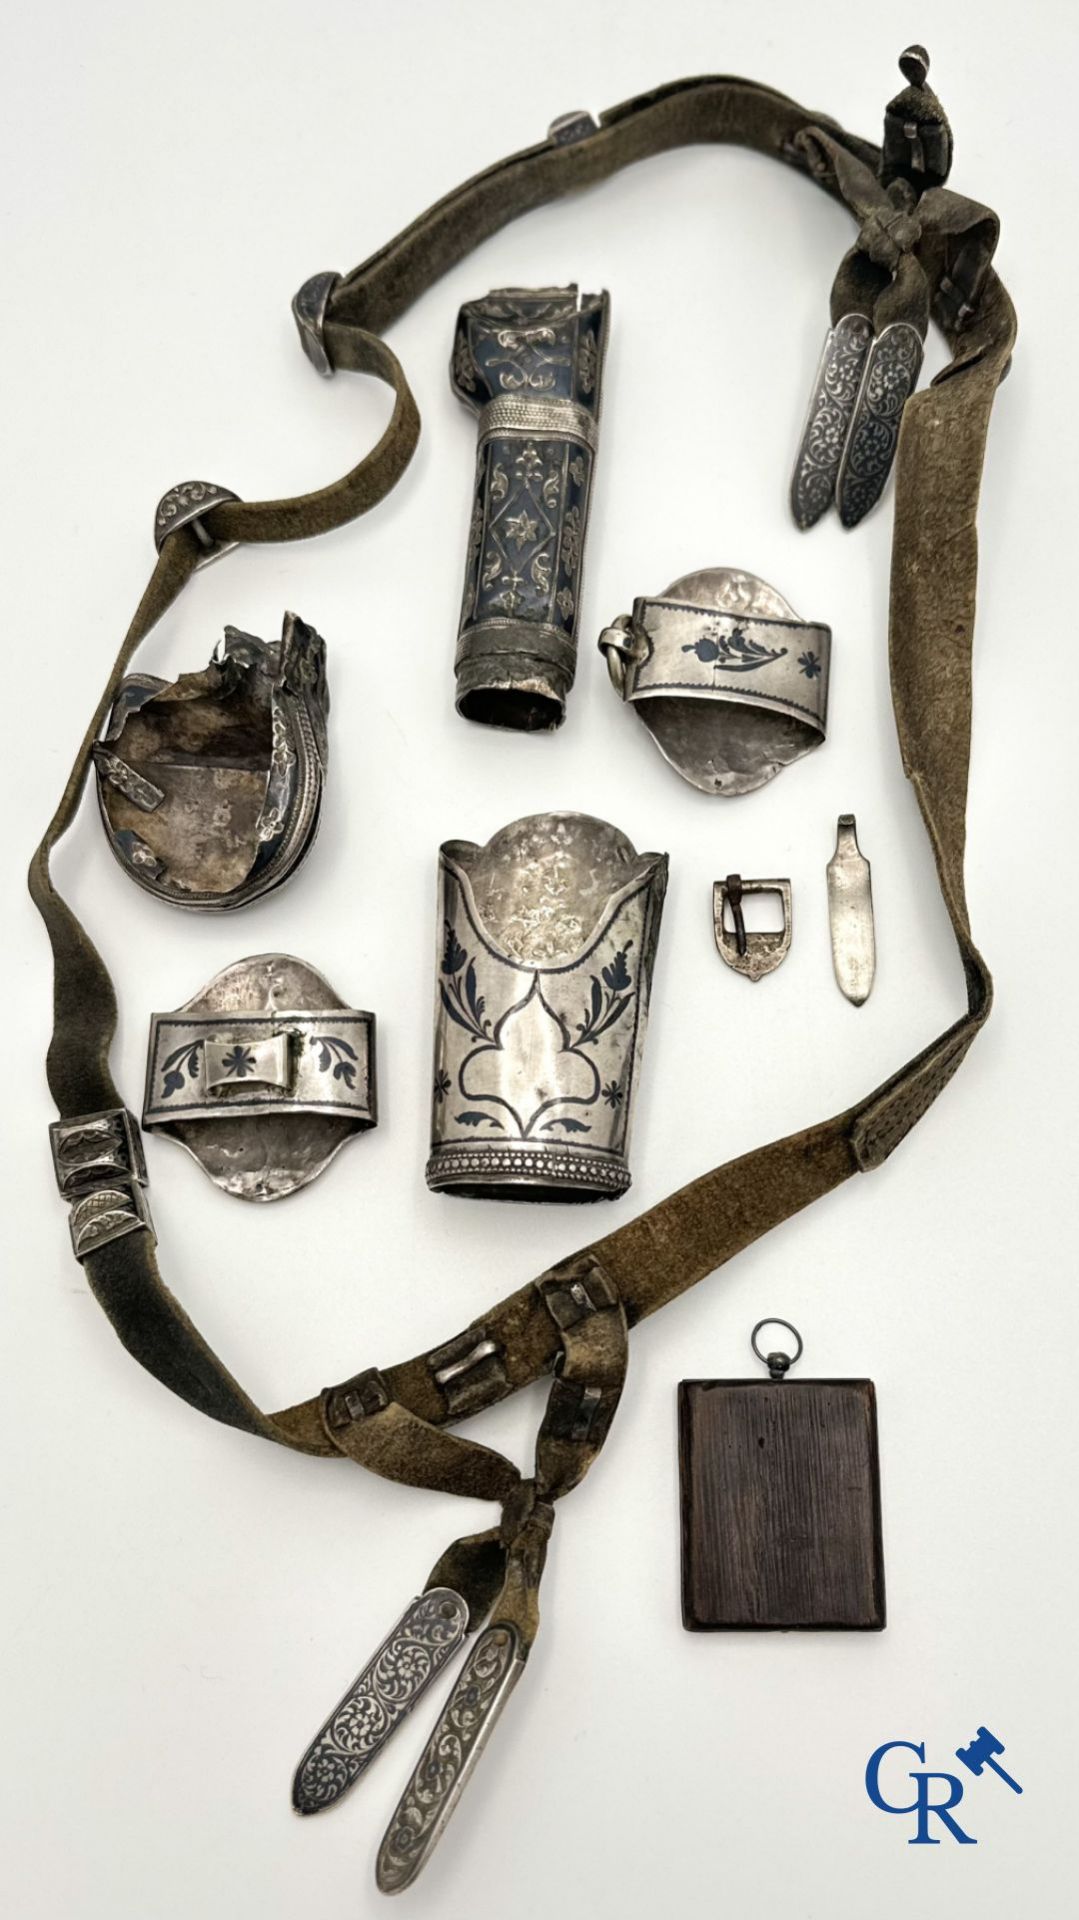 Jewellery-silver: Russian work: Caucasian belt in silver and pendant with icon in silver. - Bild 2 aus 3